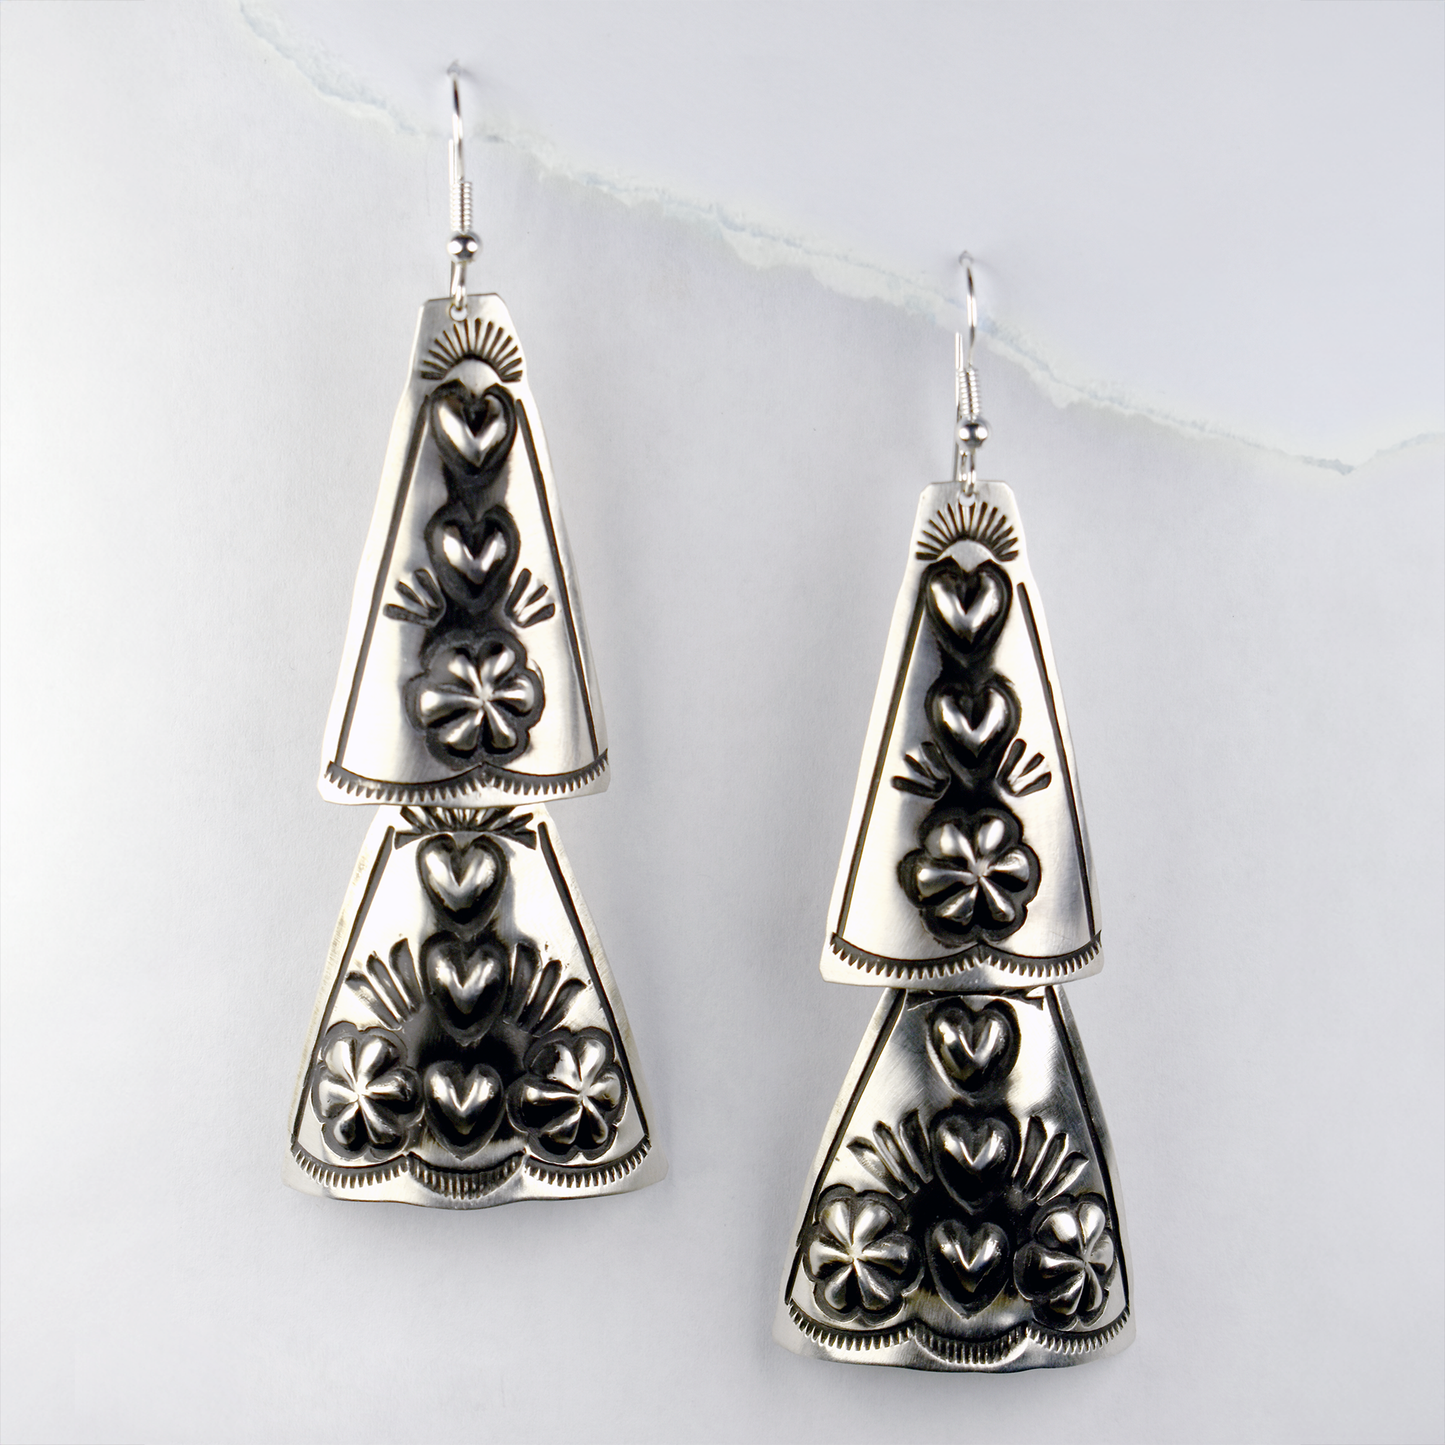 Two Tier Triangular Articulated Repoussé Heart & Flower Dangles by Leander Tahe